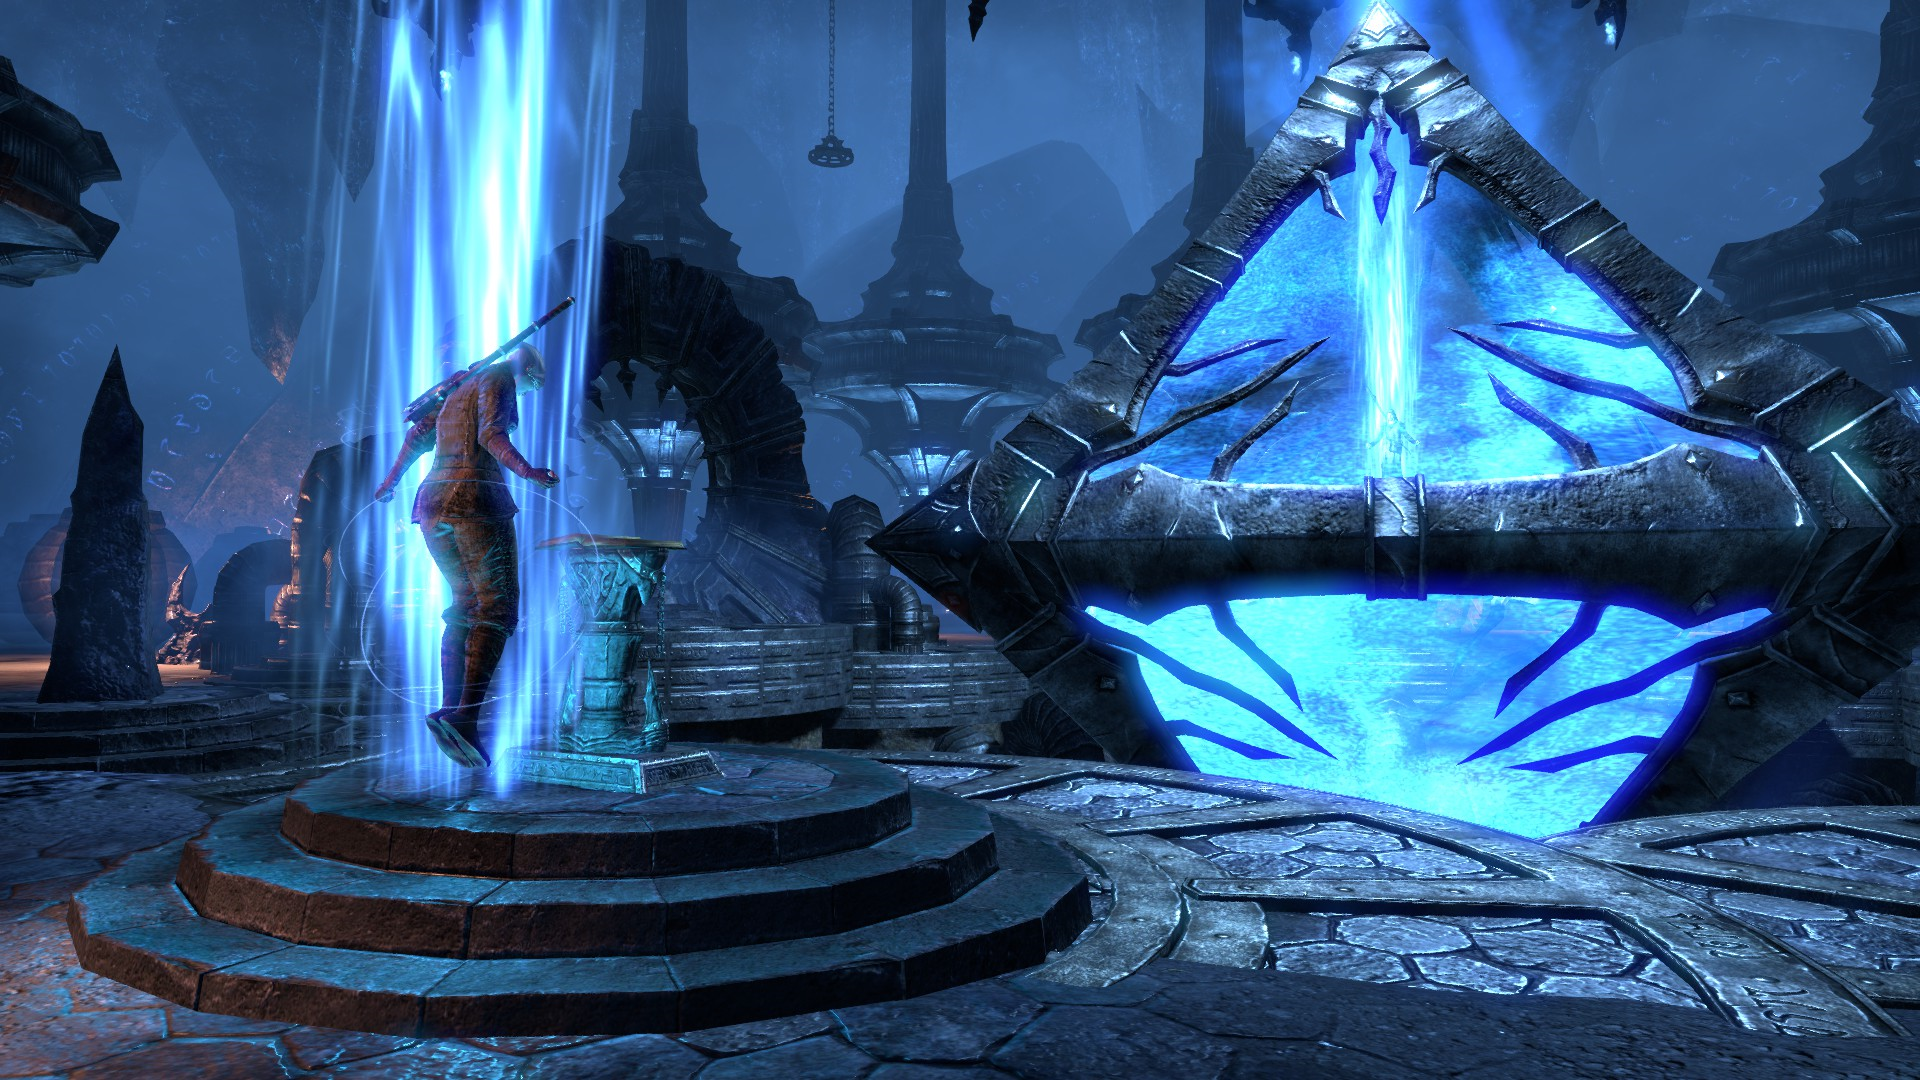 Gallery of Eso Coldharbour Quests.